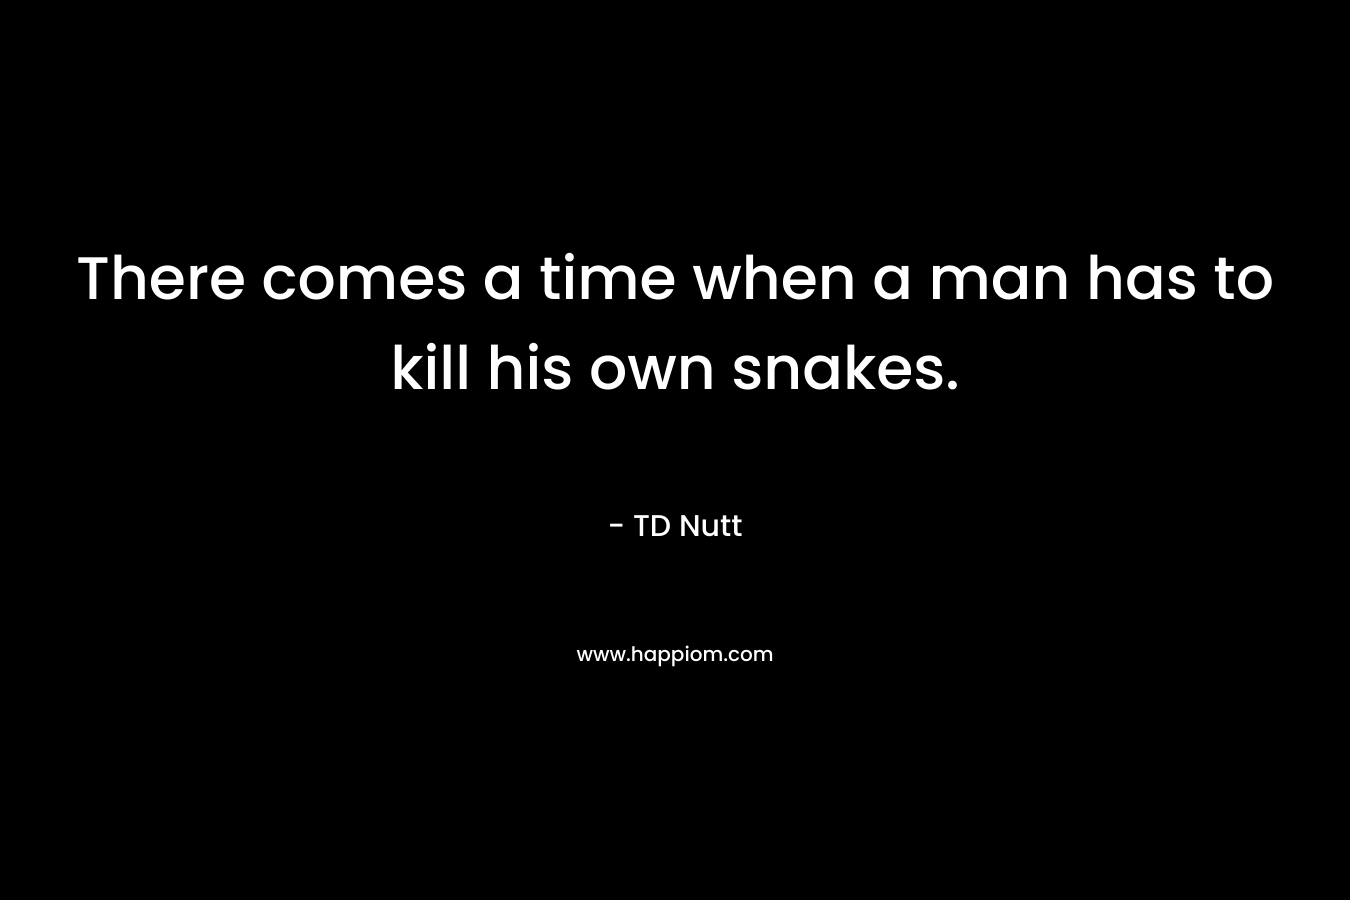 There comes a time when a man has to kill his own snakes. – TD Nutt